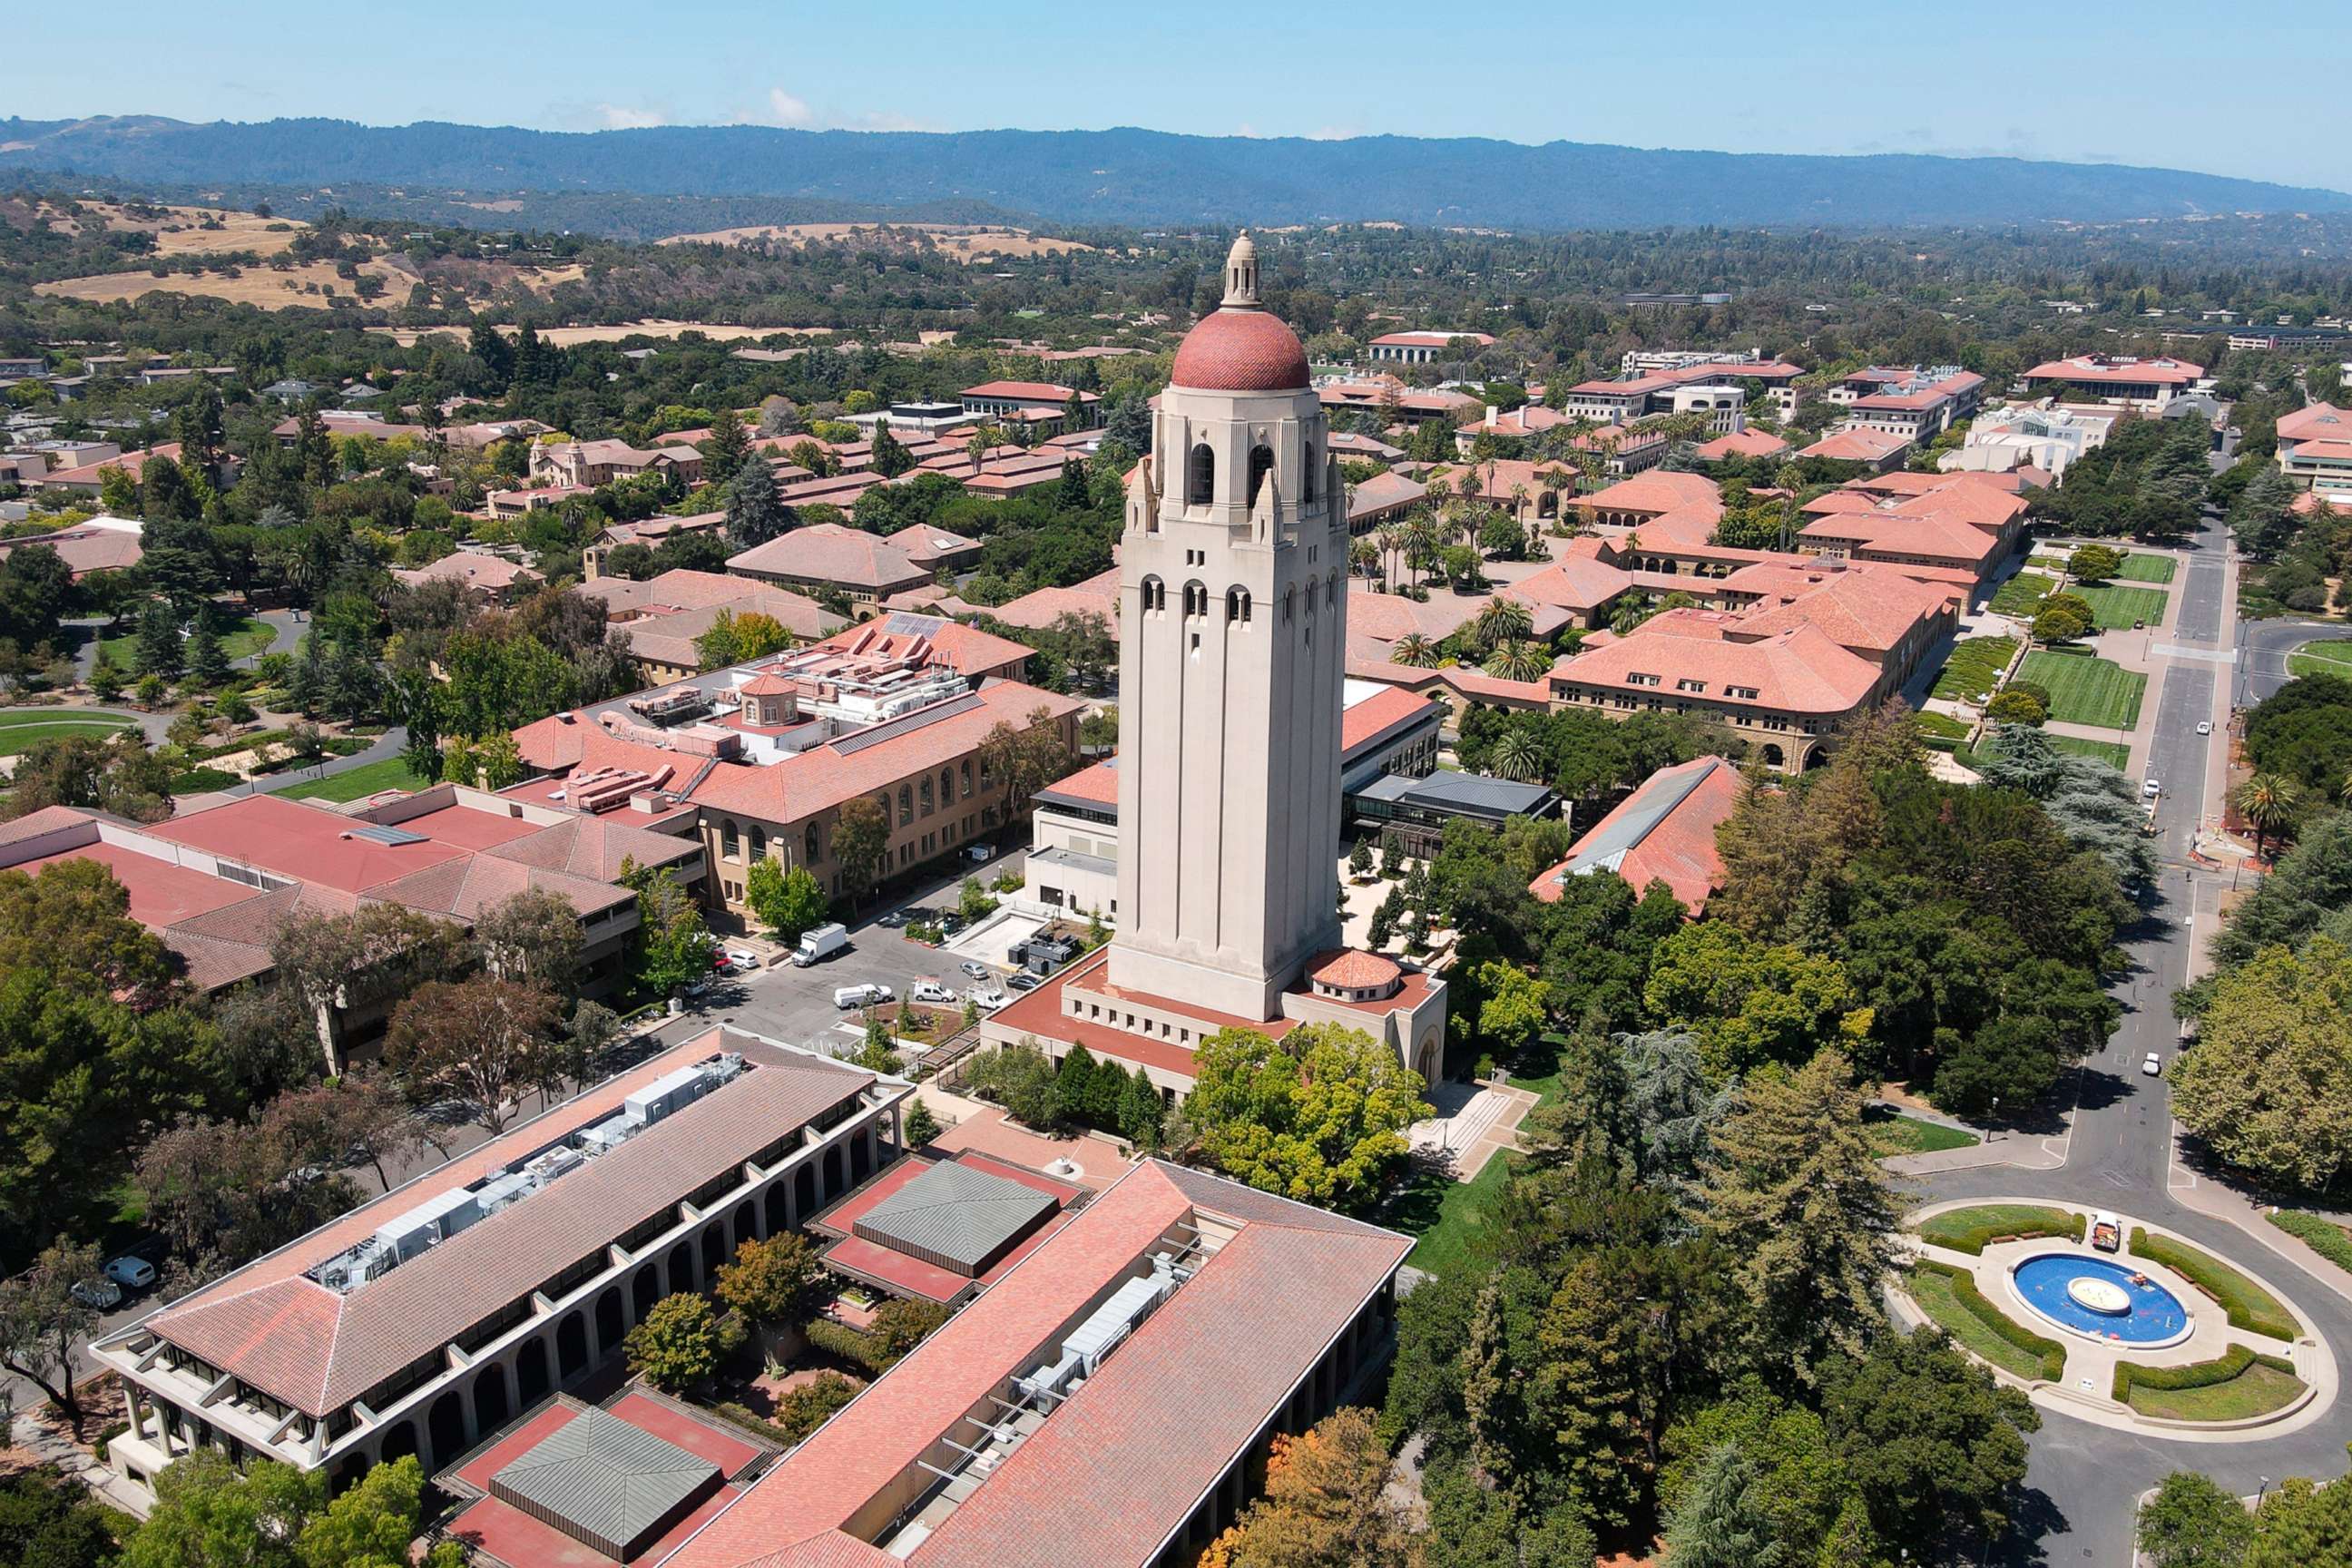 PHOTO: In this Aug. 6, 2020, file photo, a general view of Hoover Tower on the campus of Stanford University is shown in Stanford, Calif.